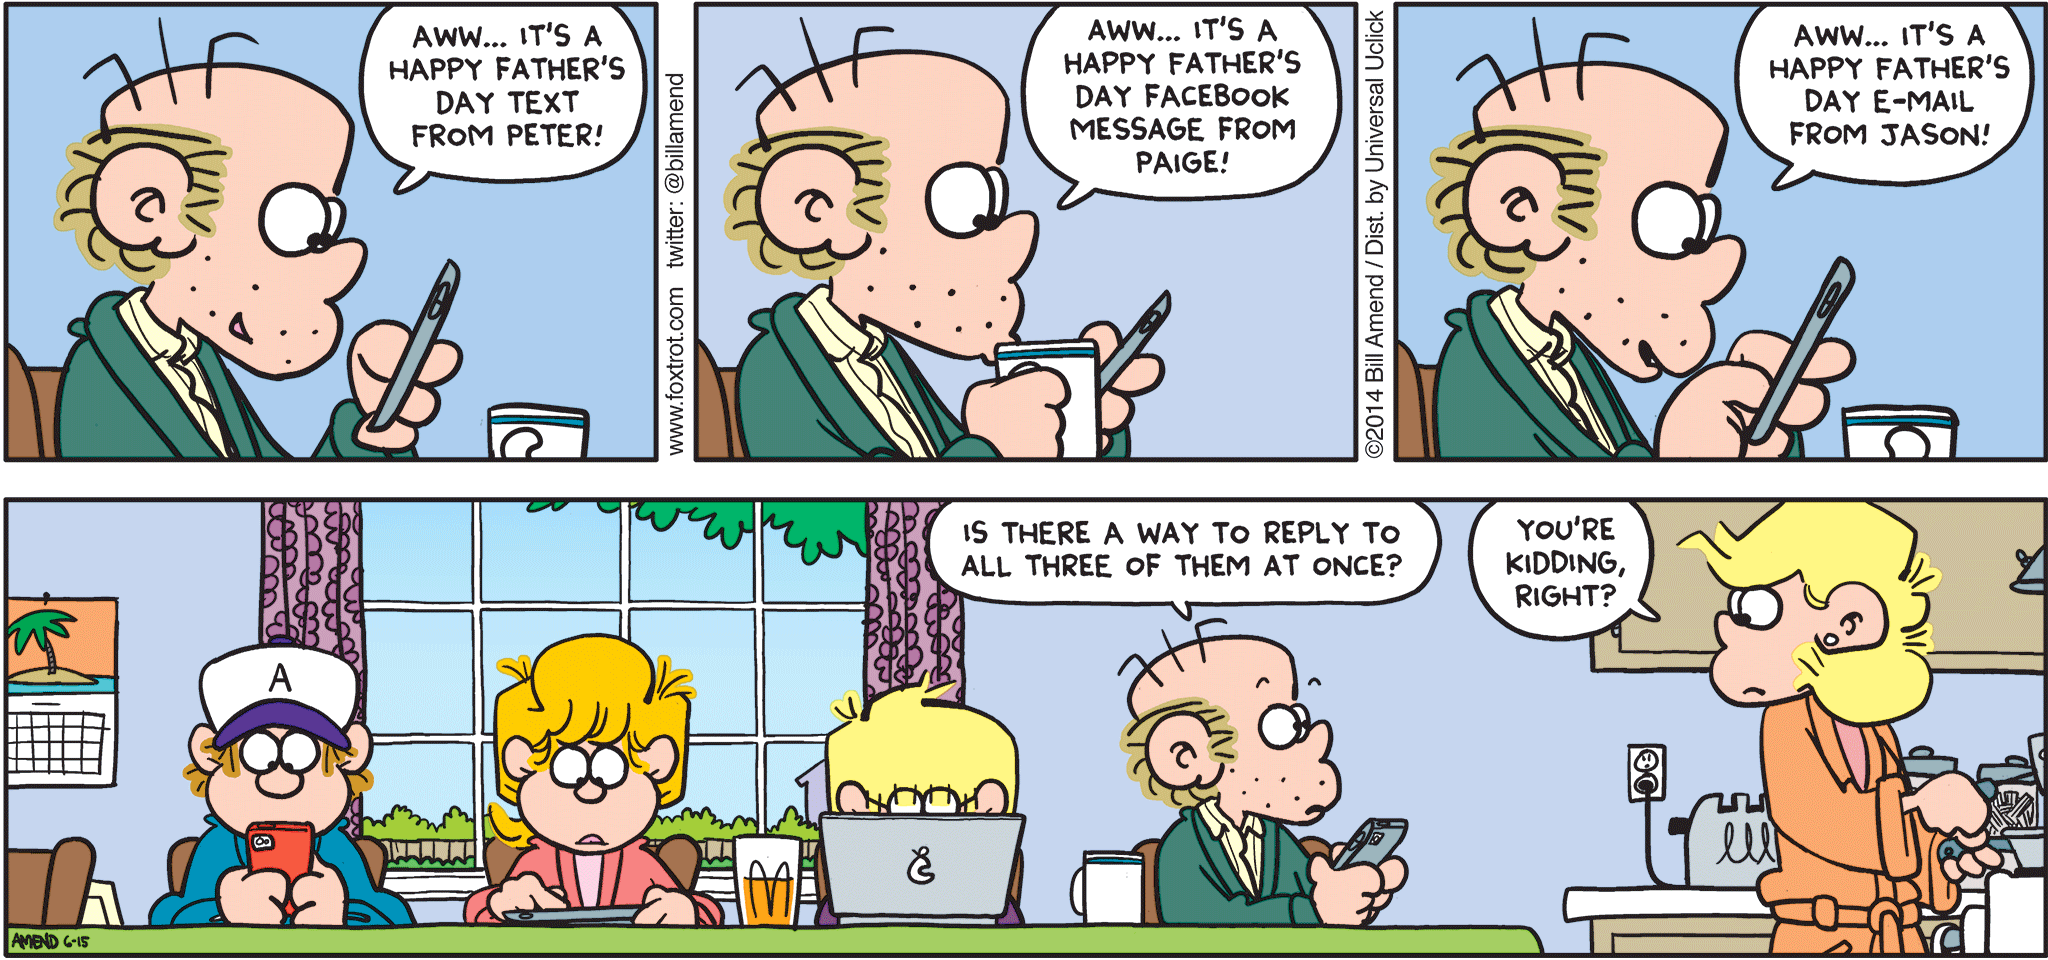 FoxTrot by Bill Amend - "Reply All" published June 15, 2014 - Roger: Aww...it's a Happy Father's Day text from Peter! Aww...it's a Happy Father's Day Facebook message from Paige. Aww...it's a Happy Father's Day e-mail from Jason! Is there a way to reply to all three of them at once? Andy: You're kidding, right?